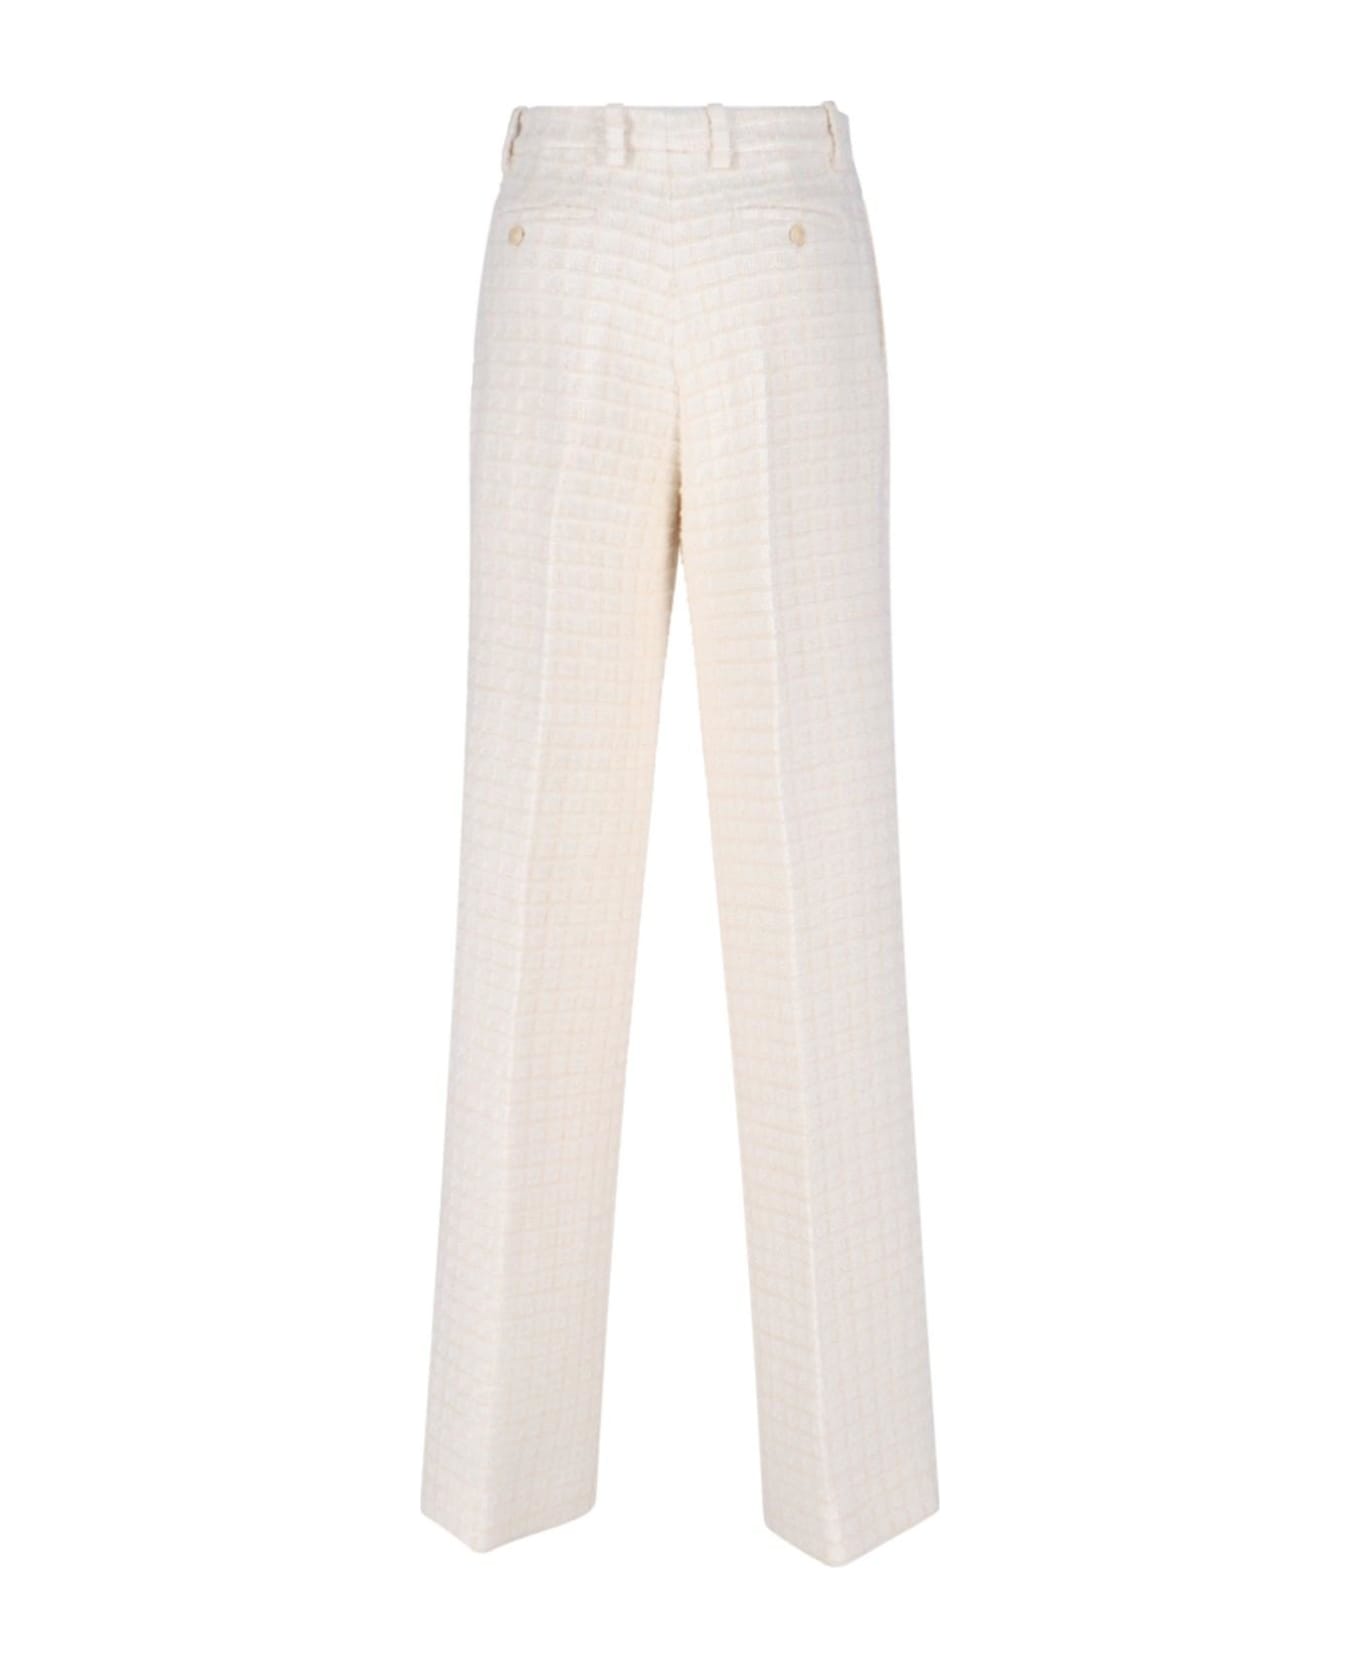 Gucci Tweed Trousers - Ivory